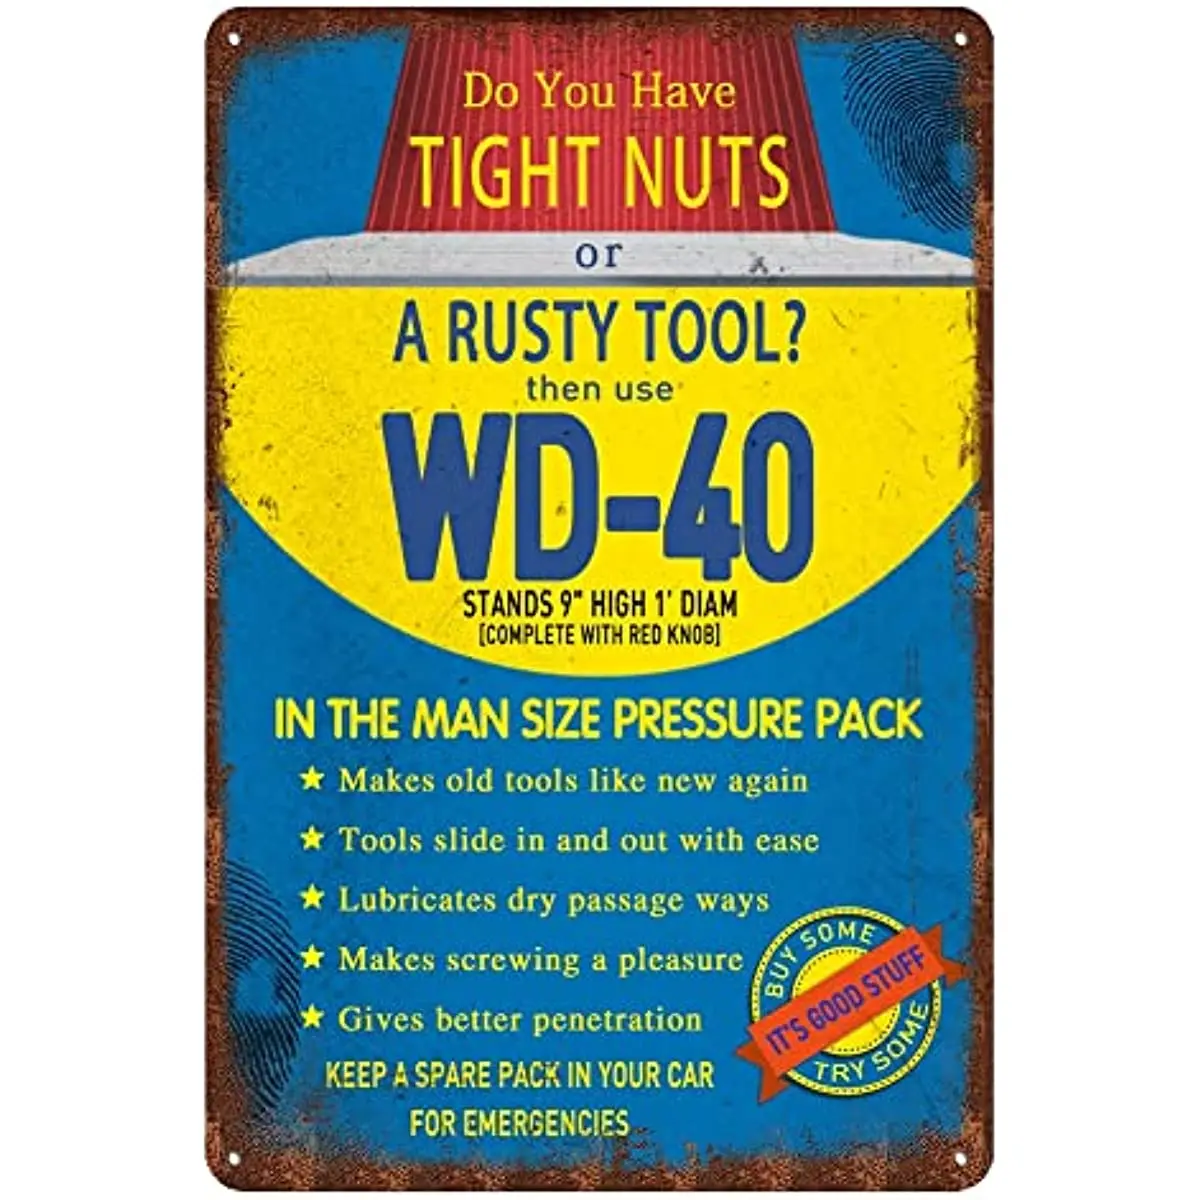 

Vintage Garage Tin Sign Man Cave Metal Sign Retro Wall Decor - Do You Have Tight Nuts Or A Rusty ToolThen use WD40